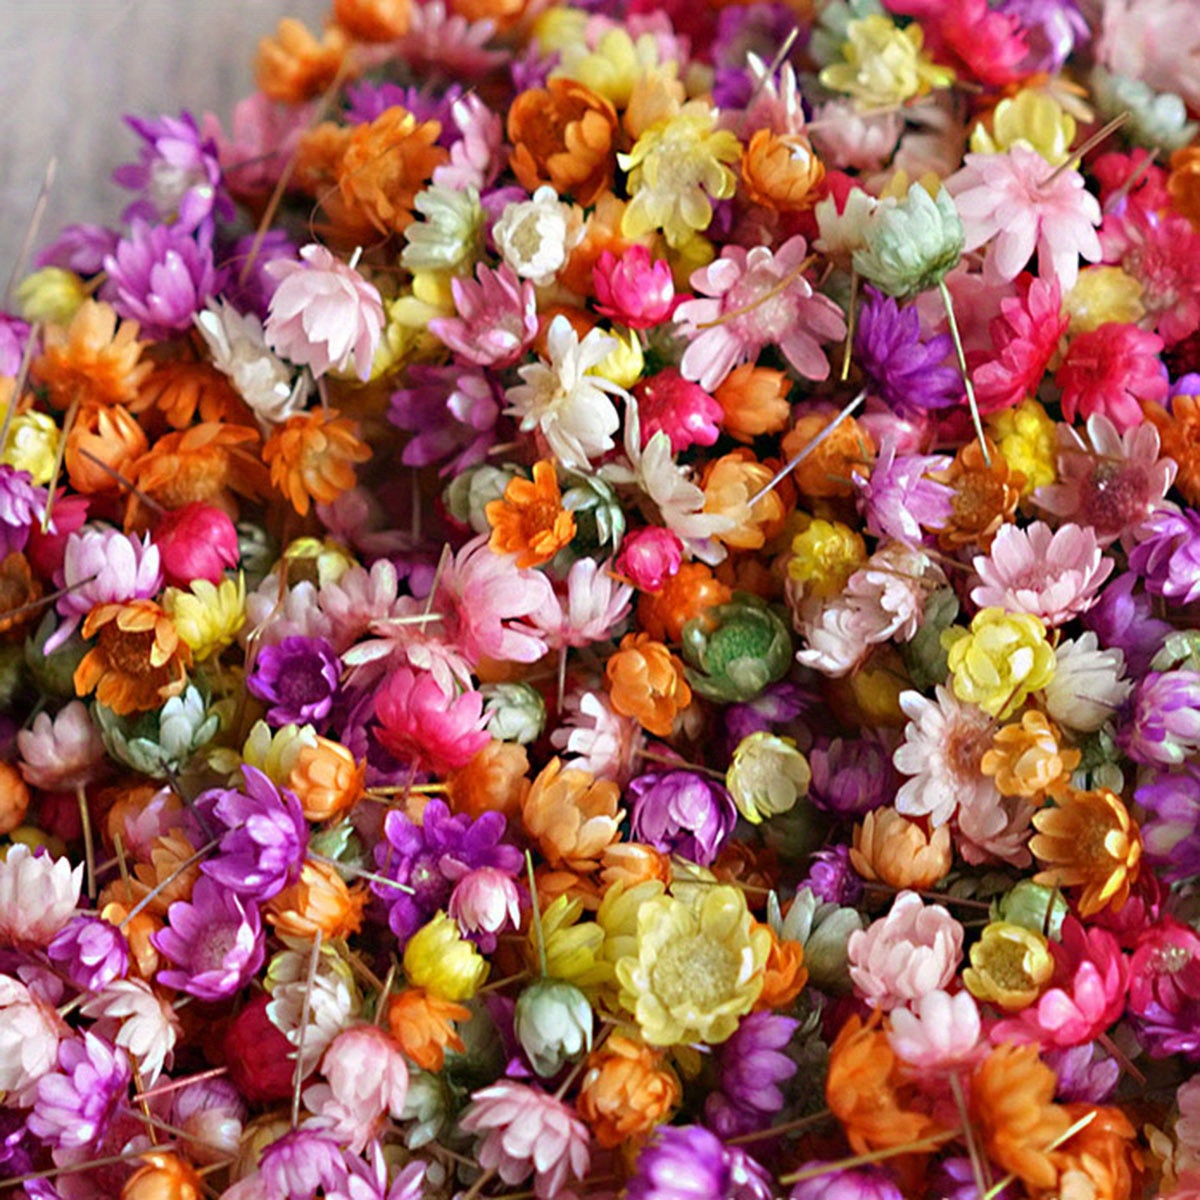 

200pcs Mixed Colorful Small Dried Flowers Bulk For Diy Resin Molds Fillings Project Casting Jewelry Candles Making Resin Art Charms